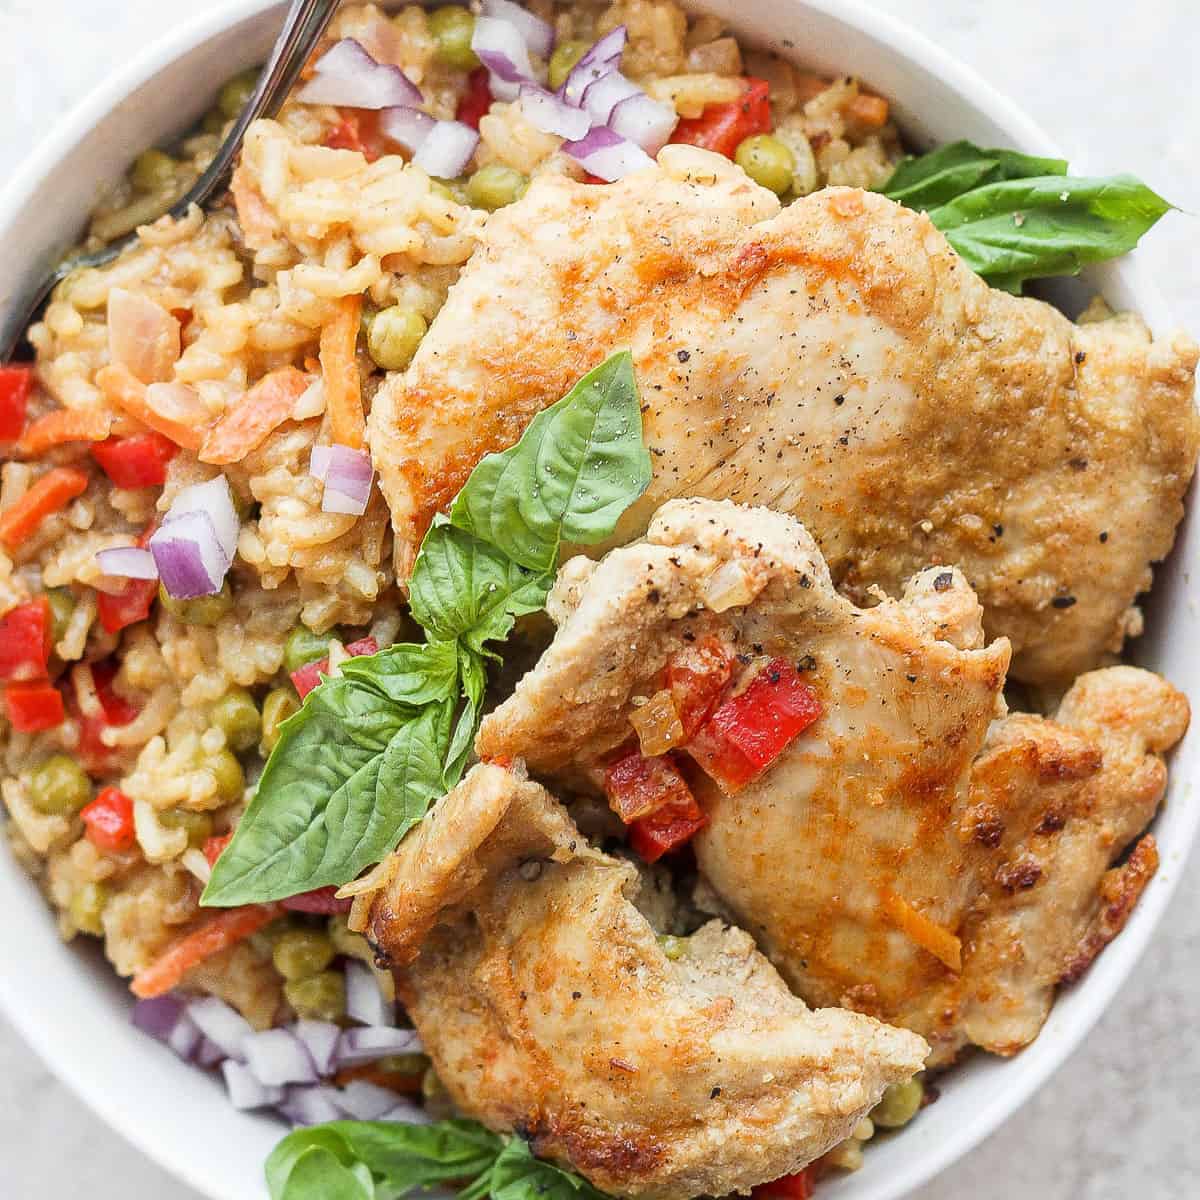 https://fitfoodiefinds.com/wp-content/uploads/2022/01/One-Pot-Curry-Chicken-and-Rice-01.jpg